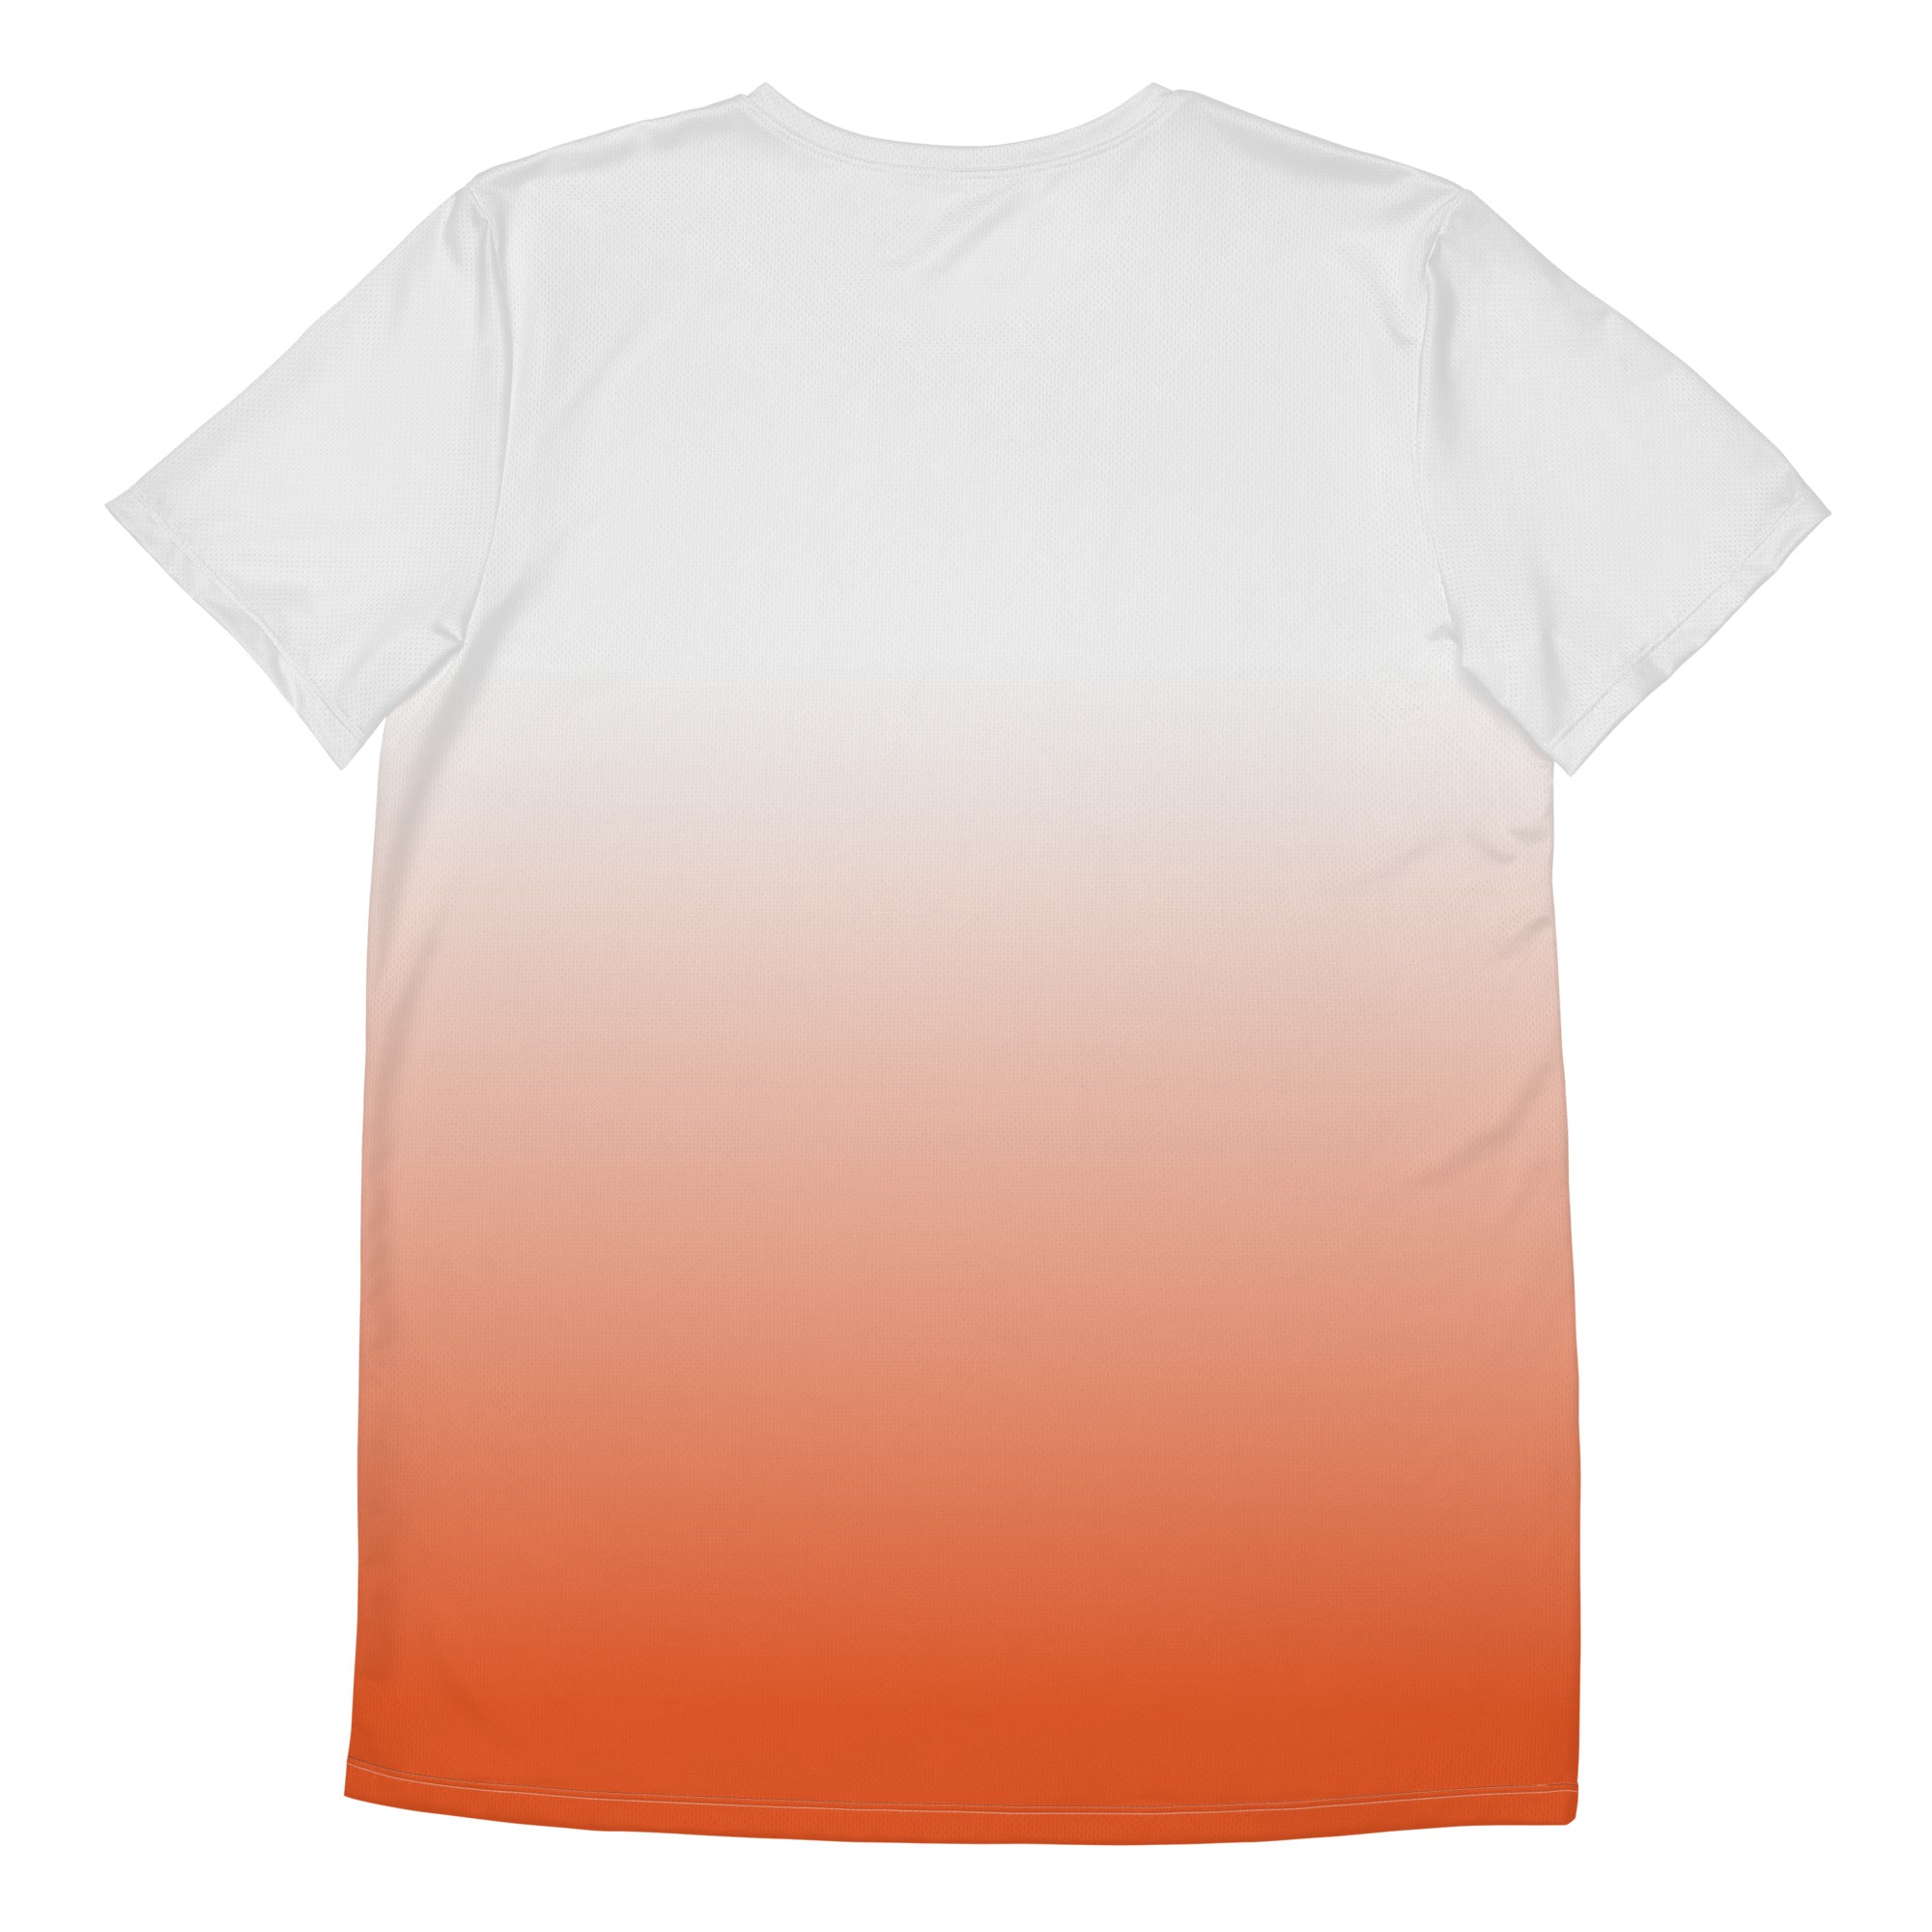 Spike - Up All-Over Print Unisex Athletic T-shirt